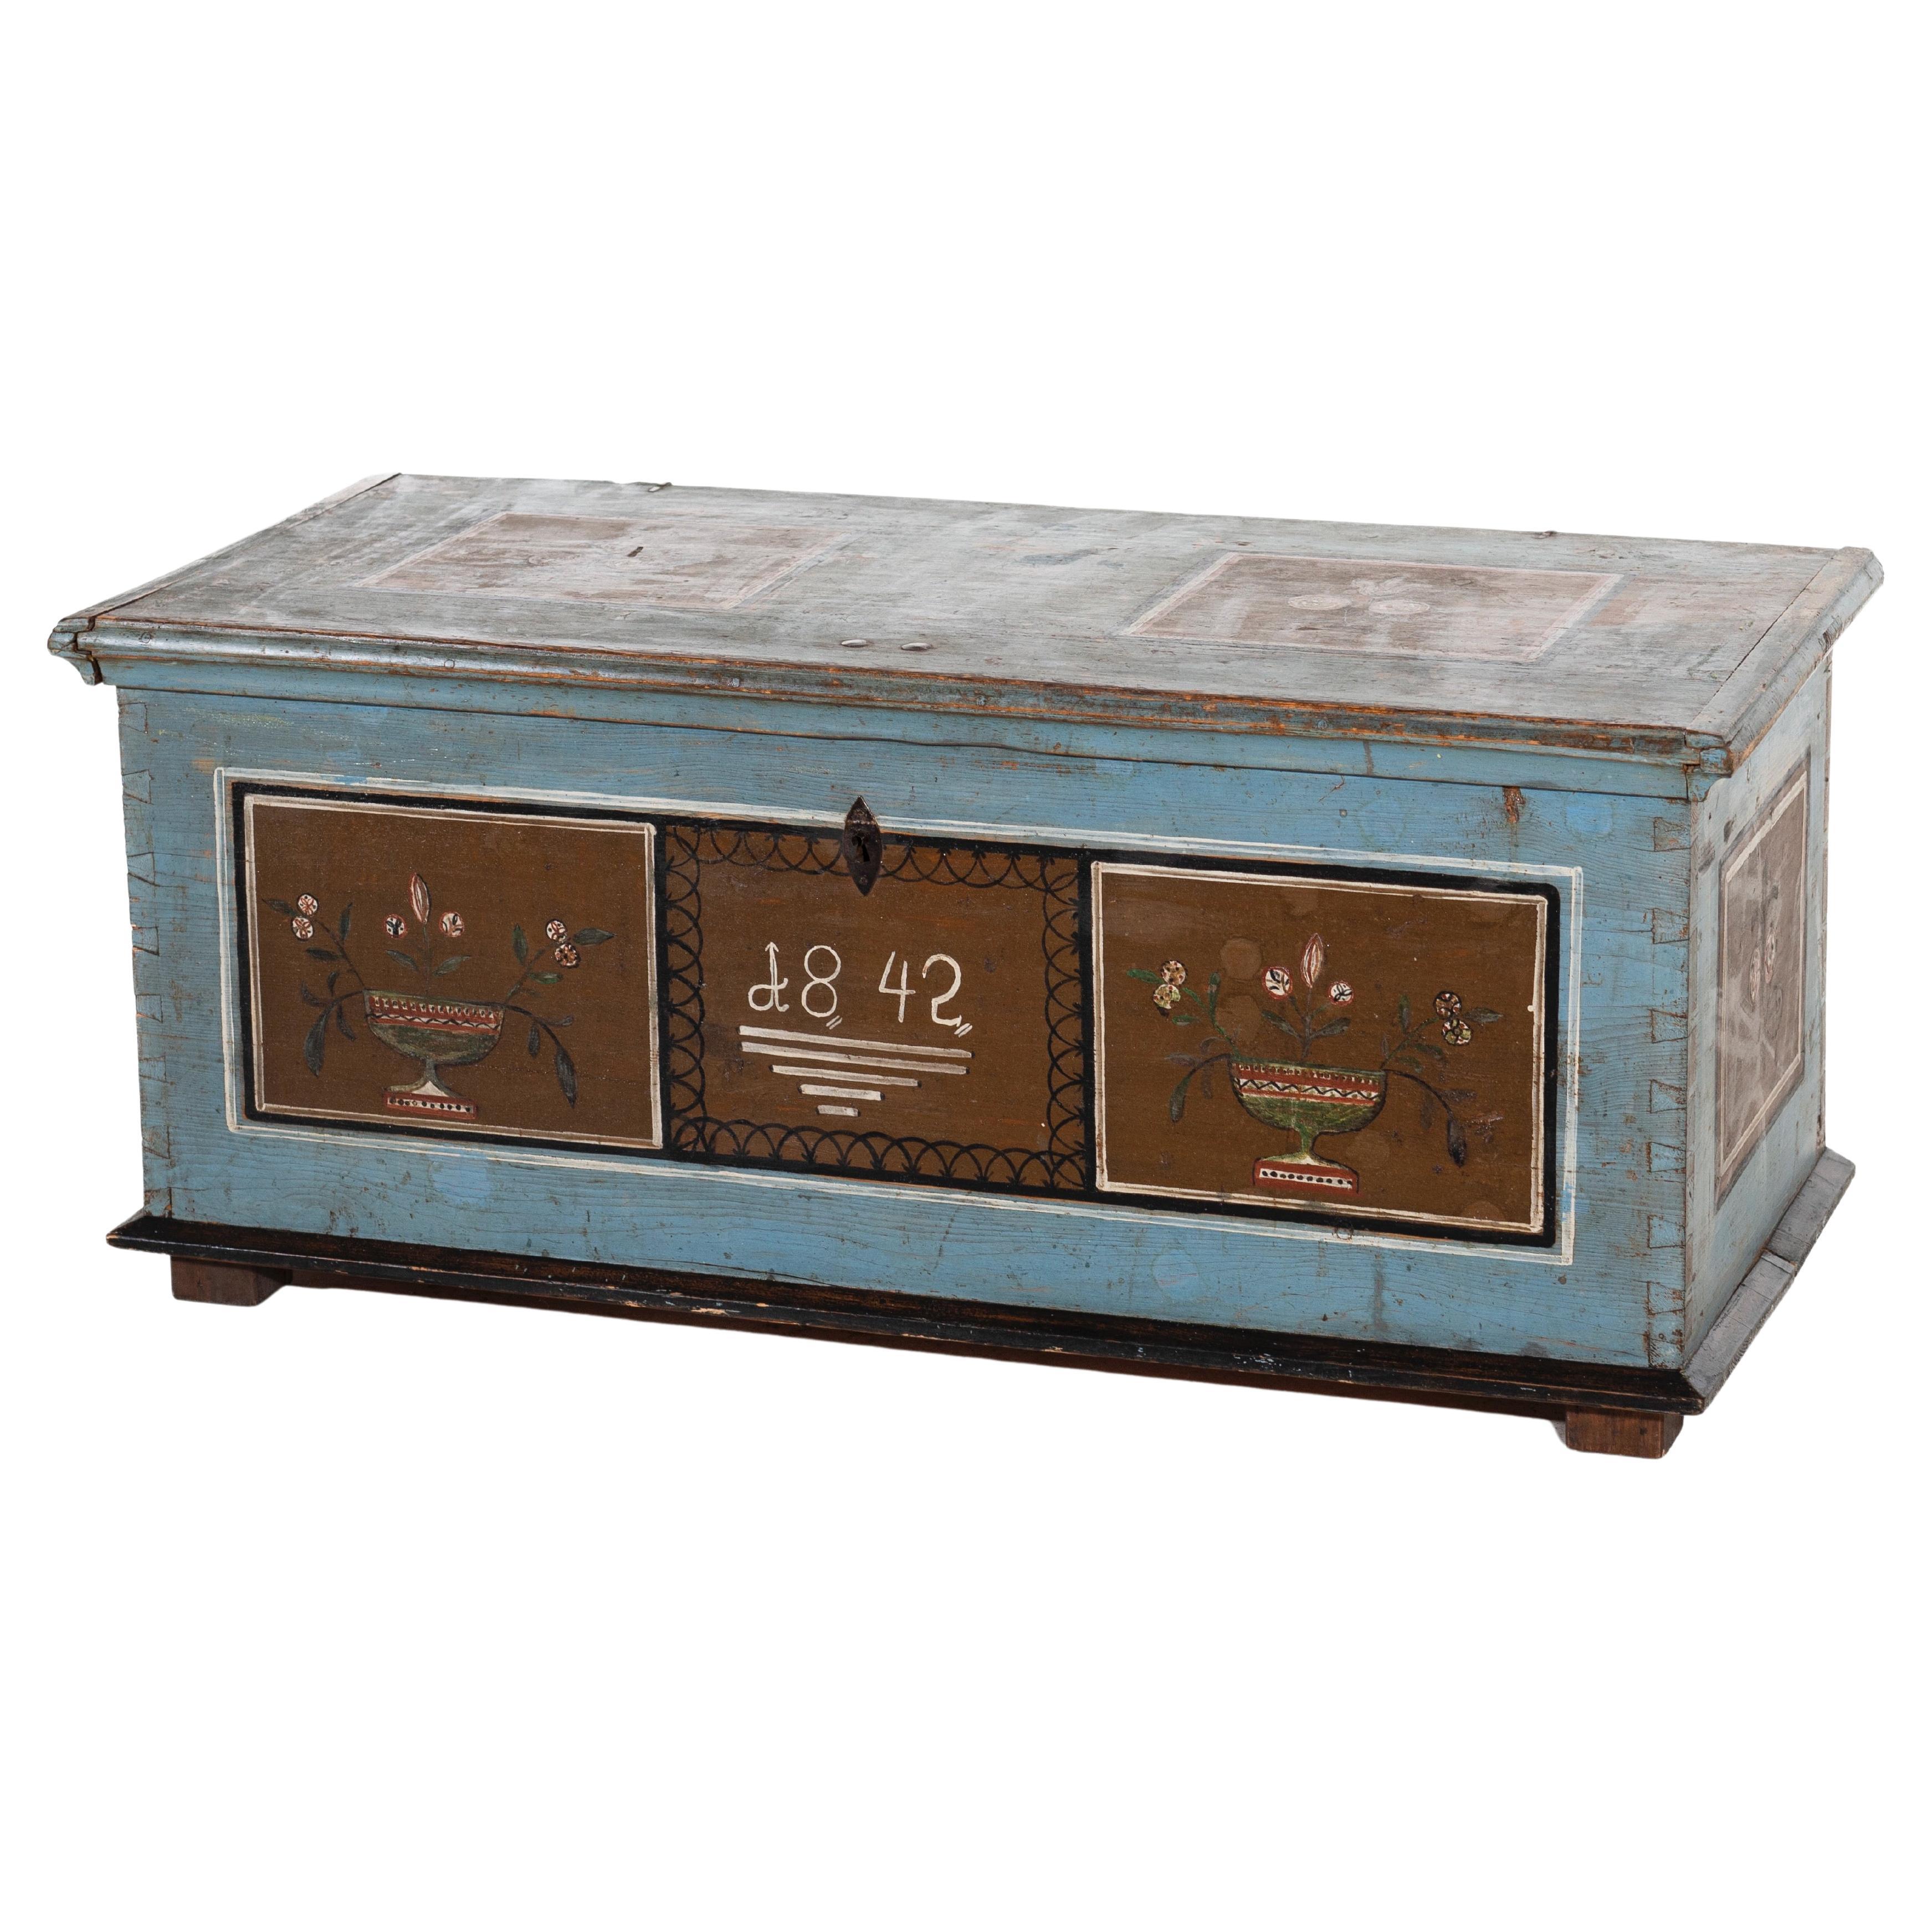 Charming Swedish trunk in original paint, dated 1842.